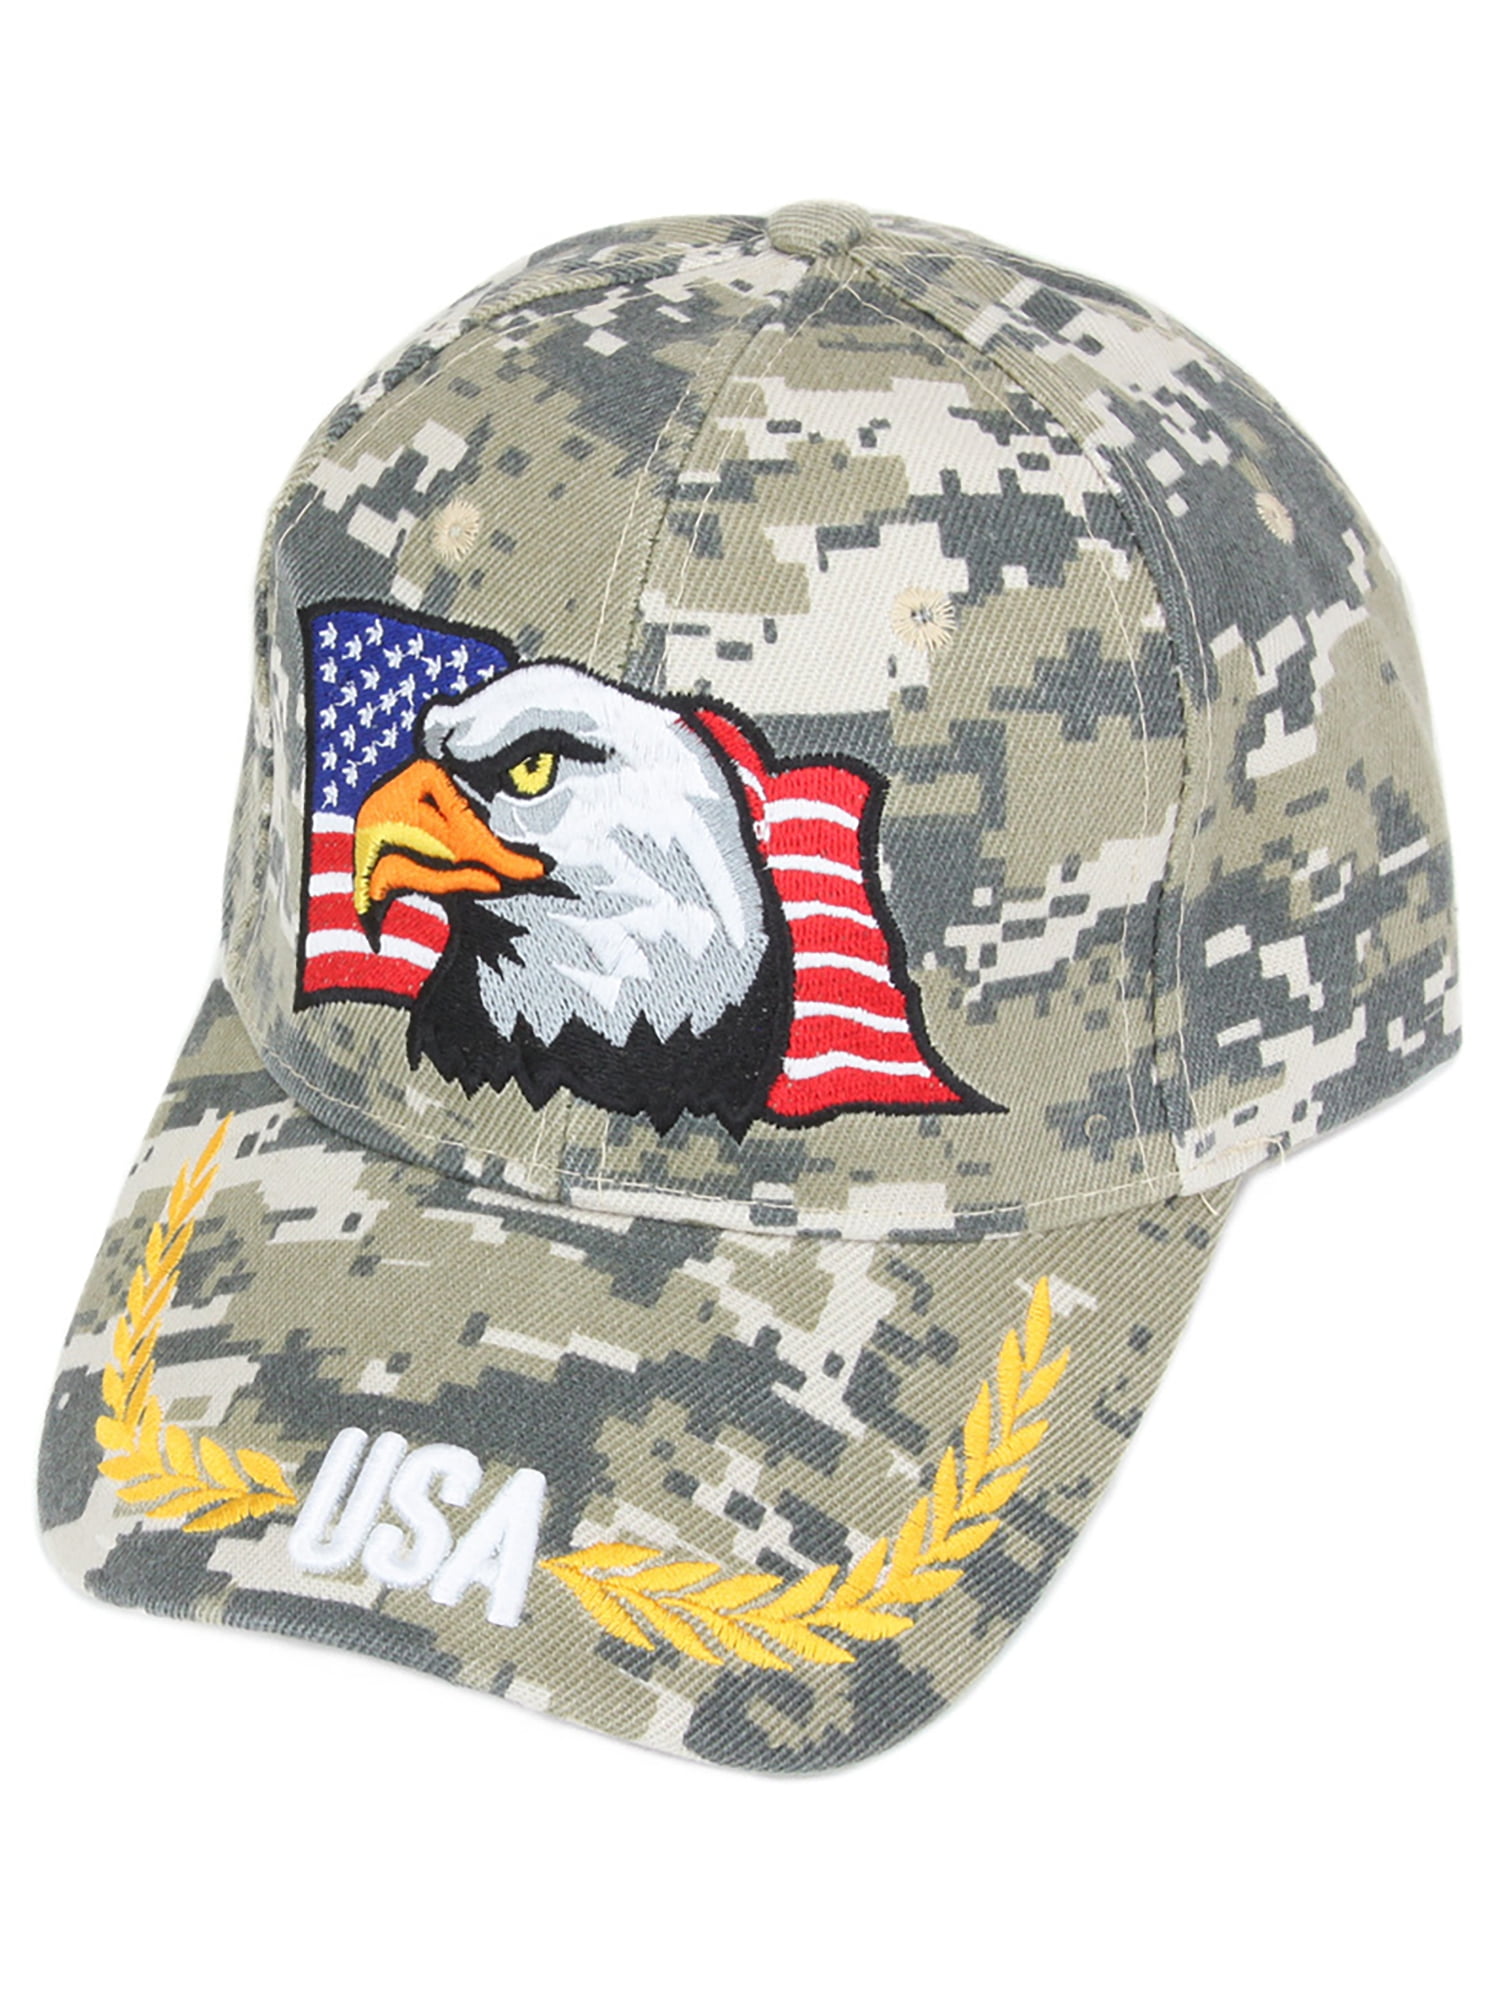 Born to Fish Forced to Work Bass Shadow Camo Camouflage Ball Cap Hat 